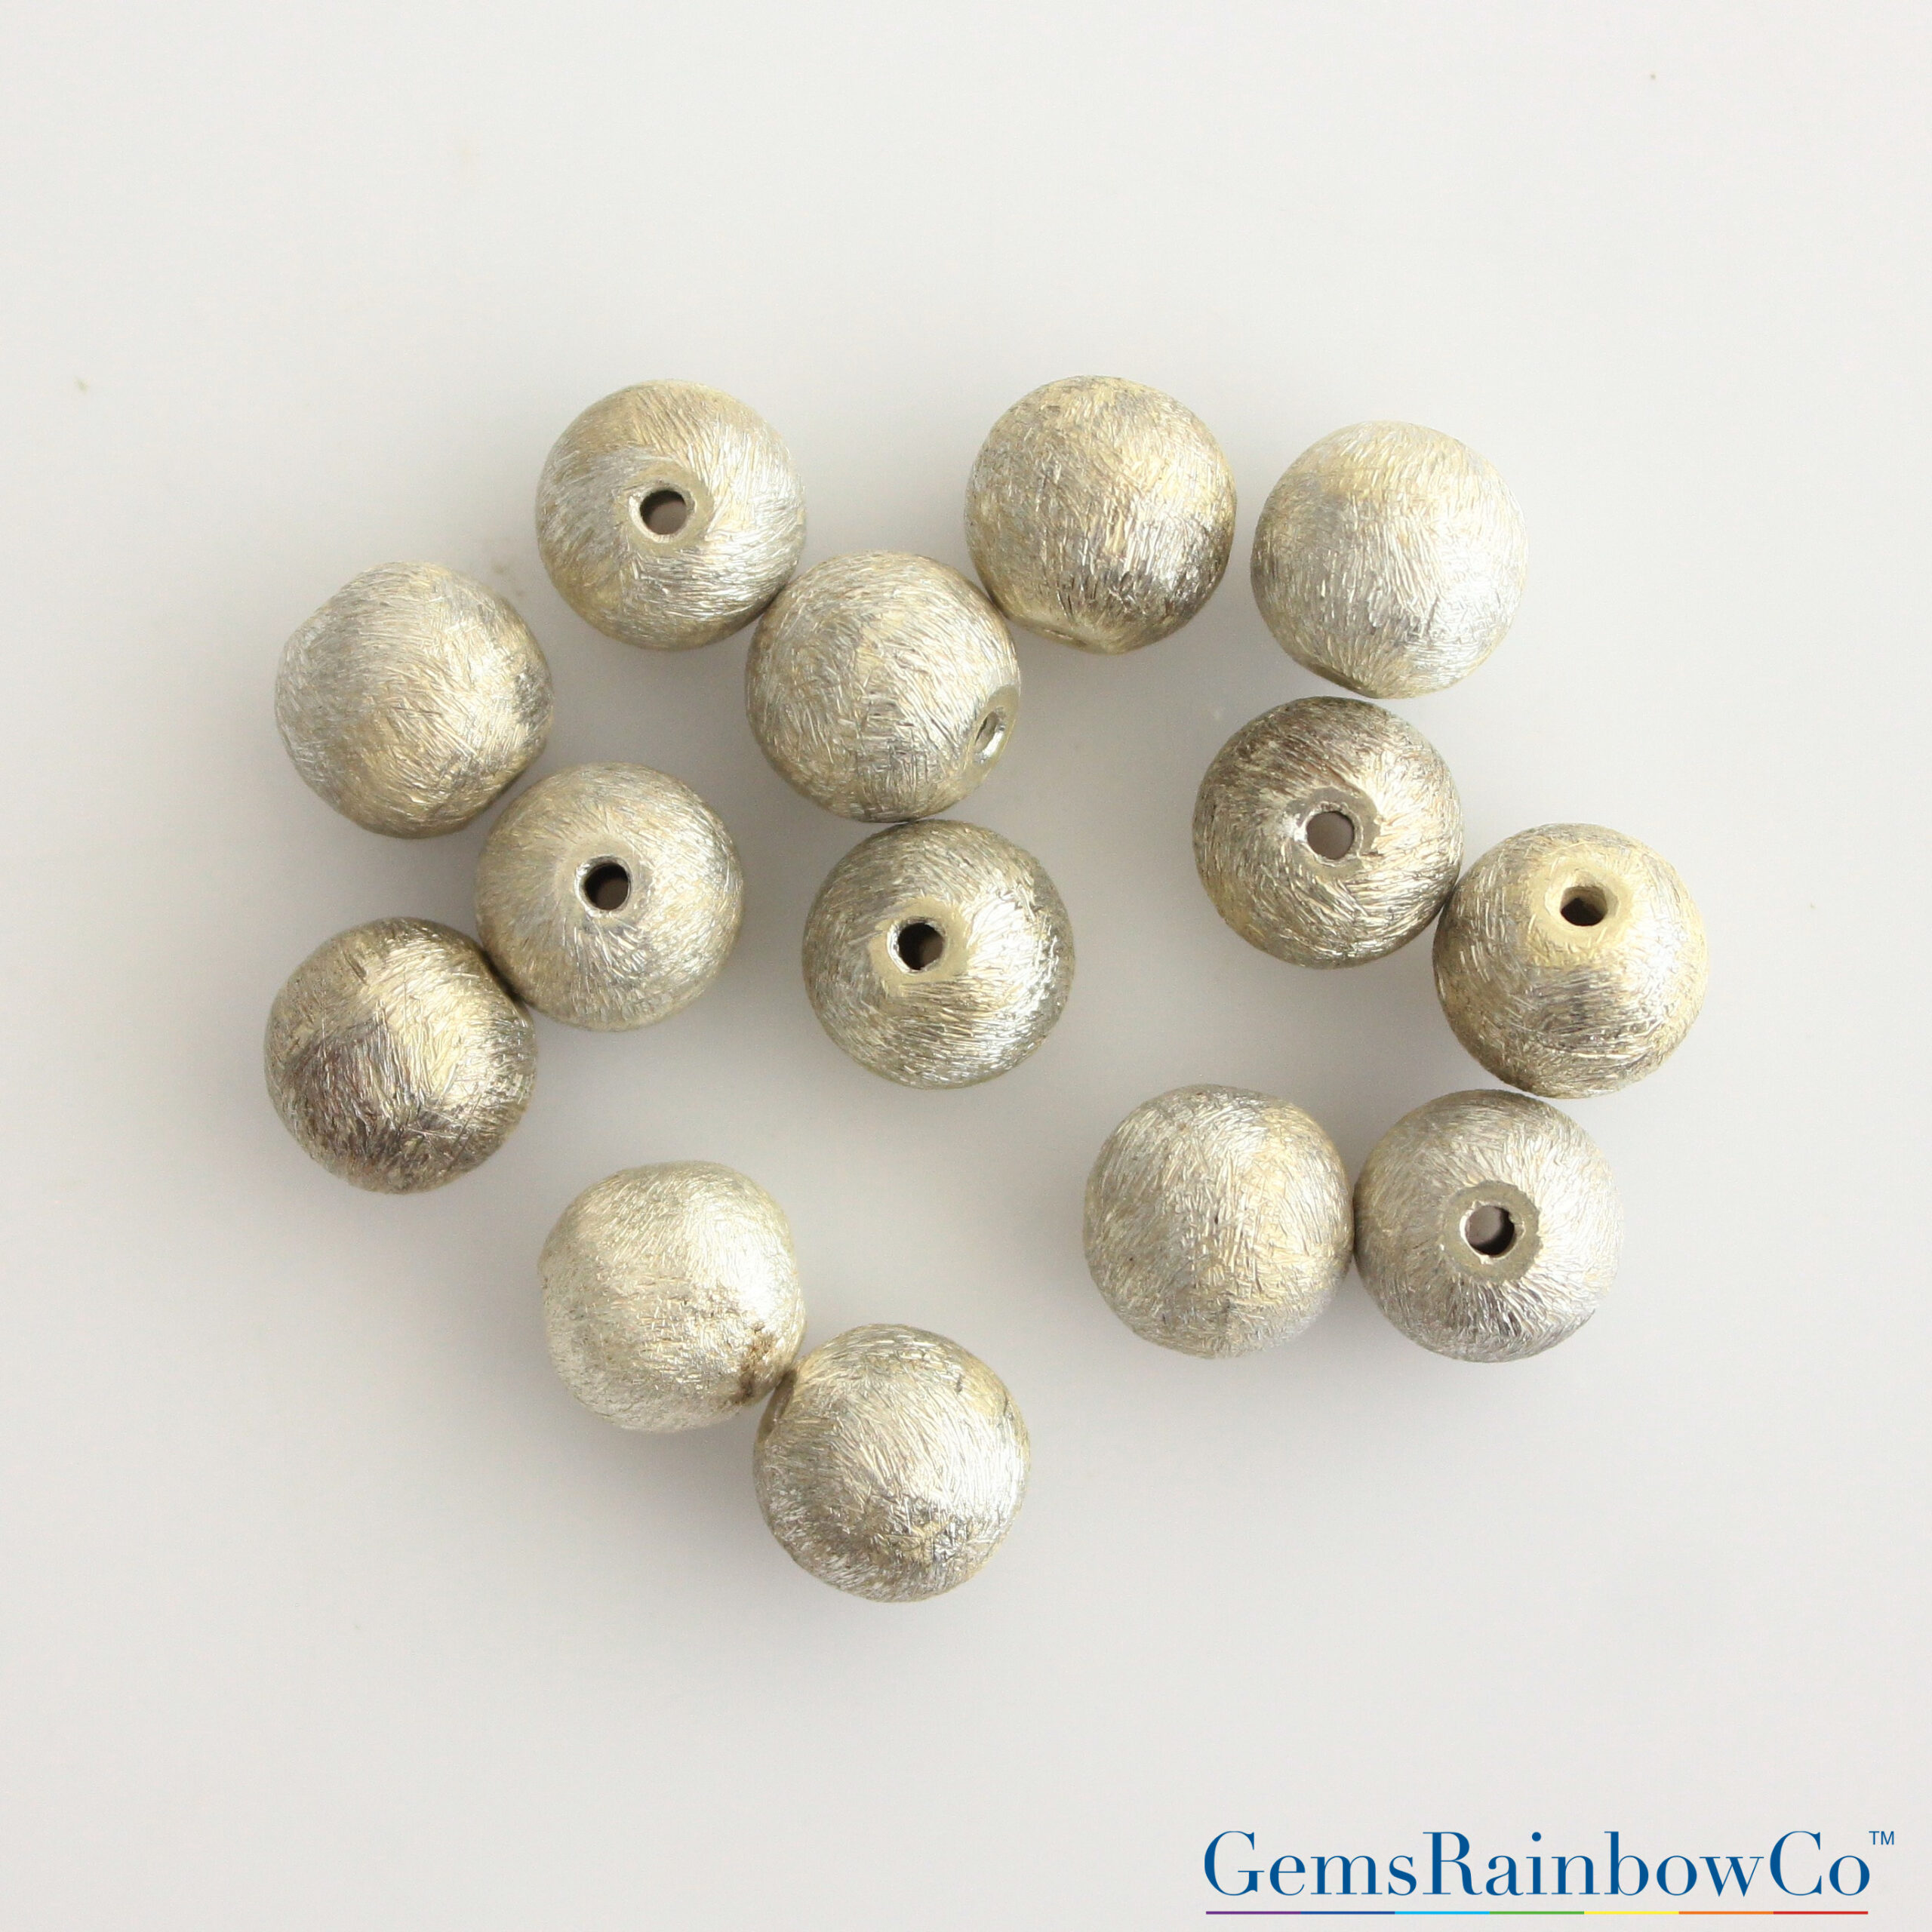 Brushed Silver Sphere Beads for Jewelry Making| GemsRainbowCo